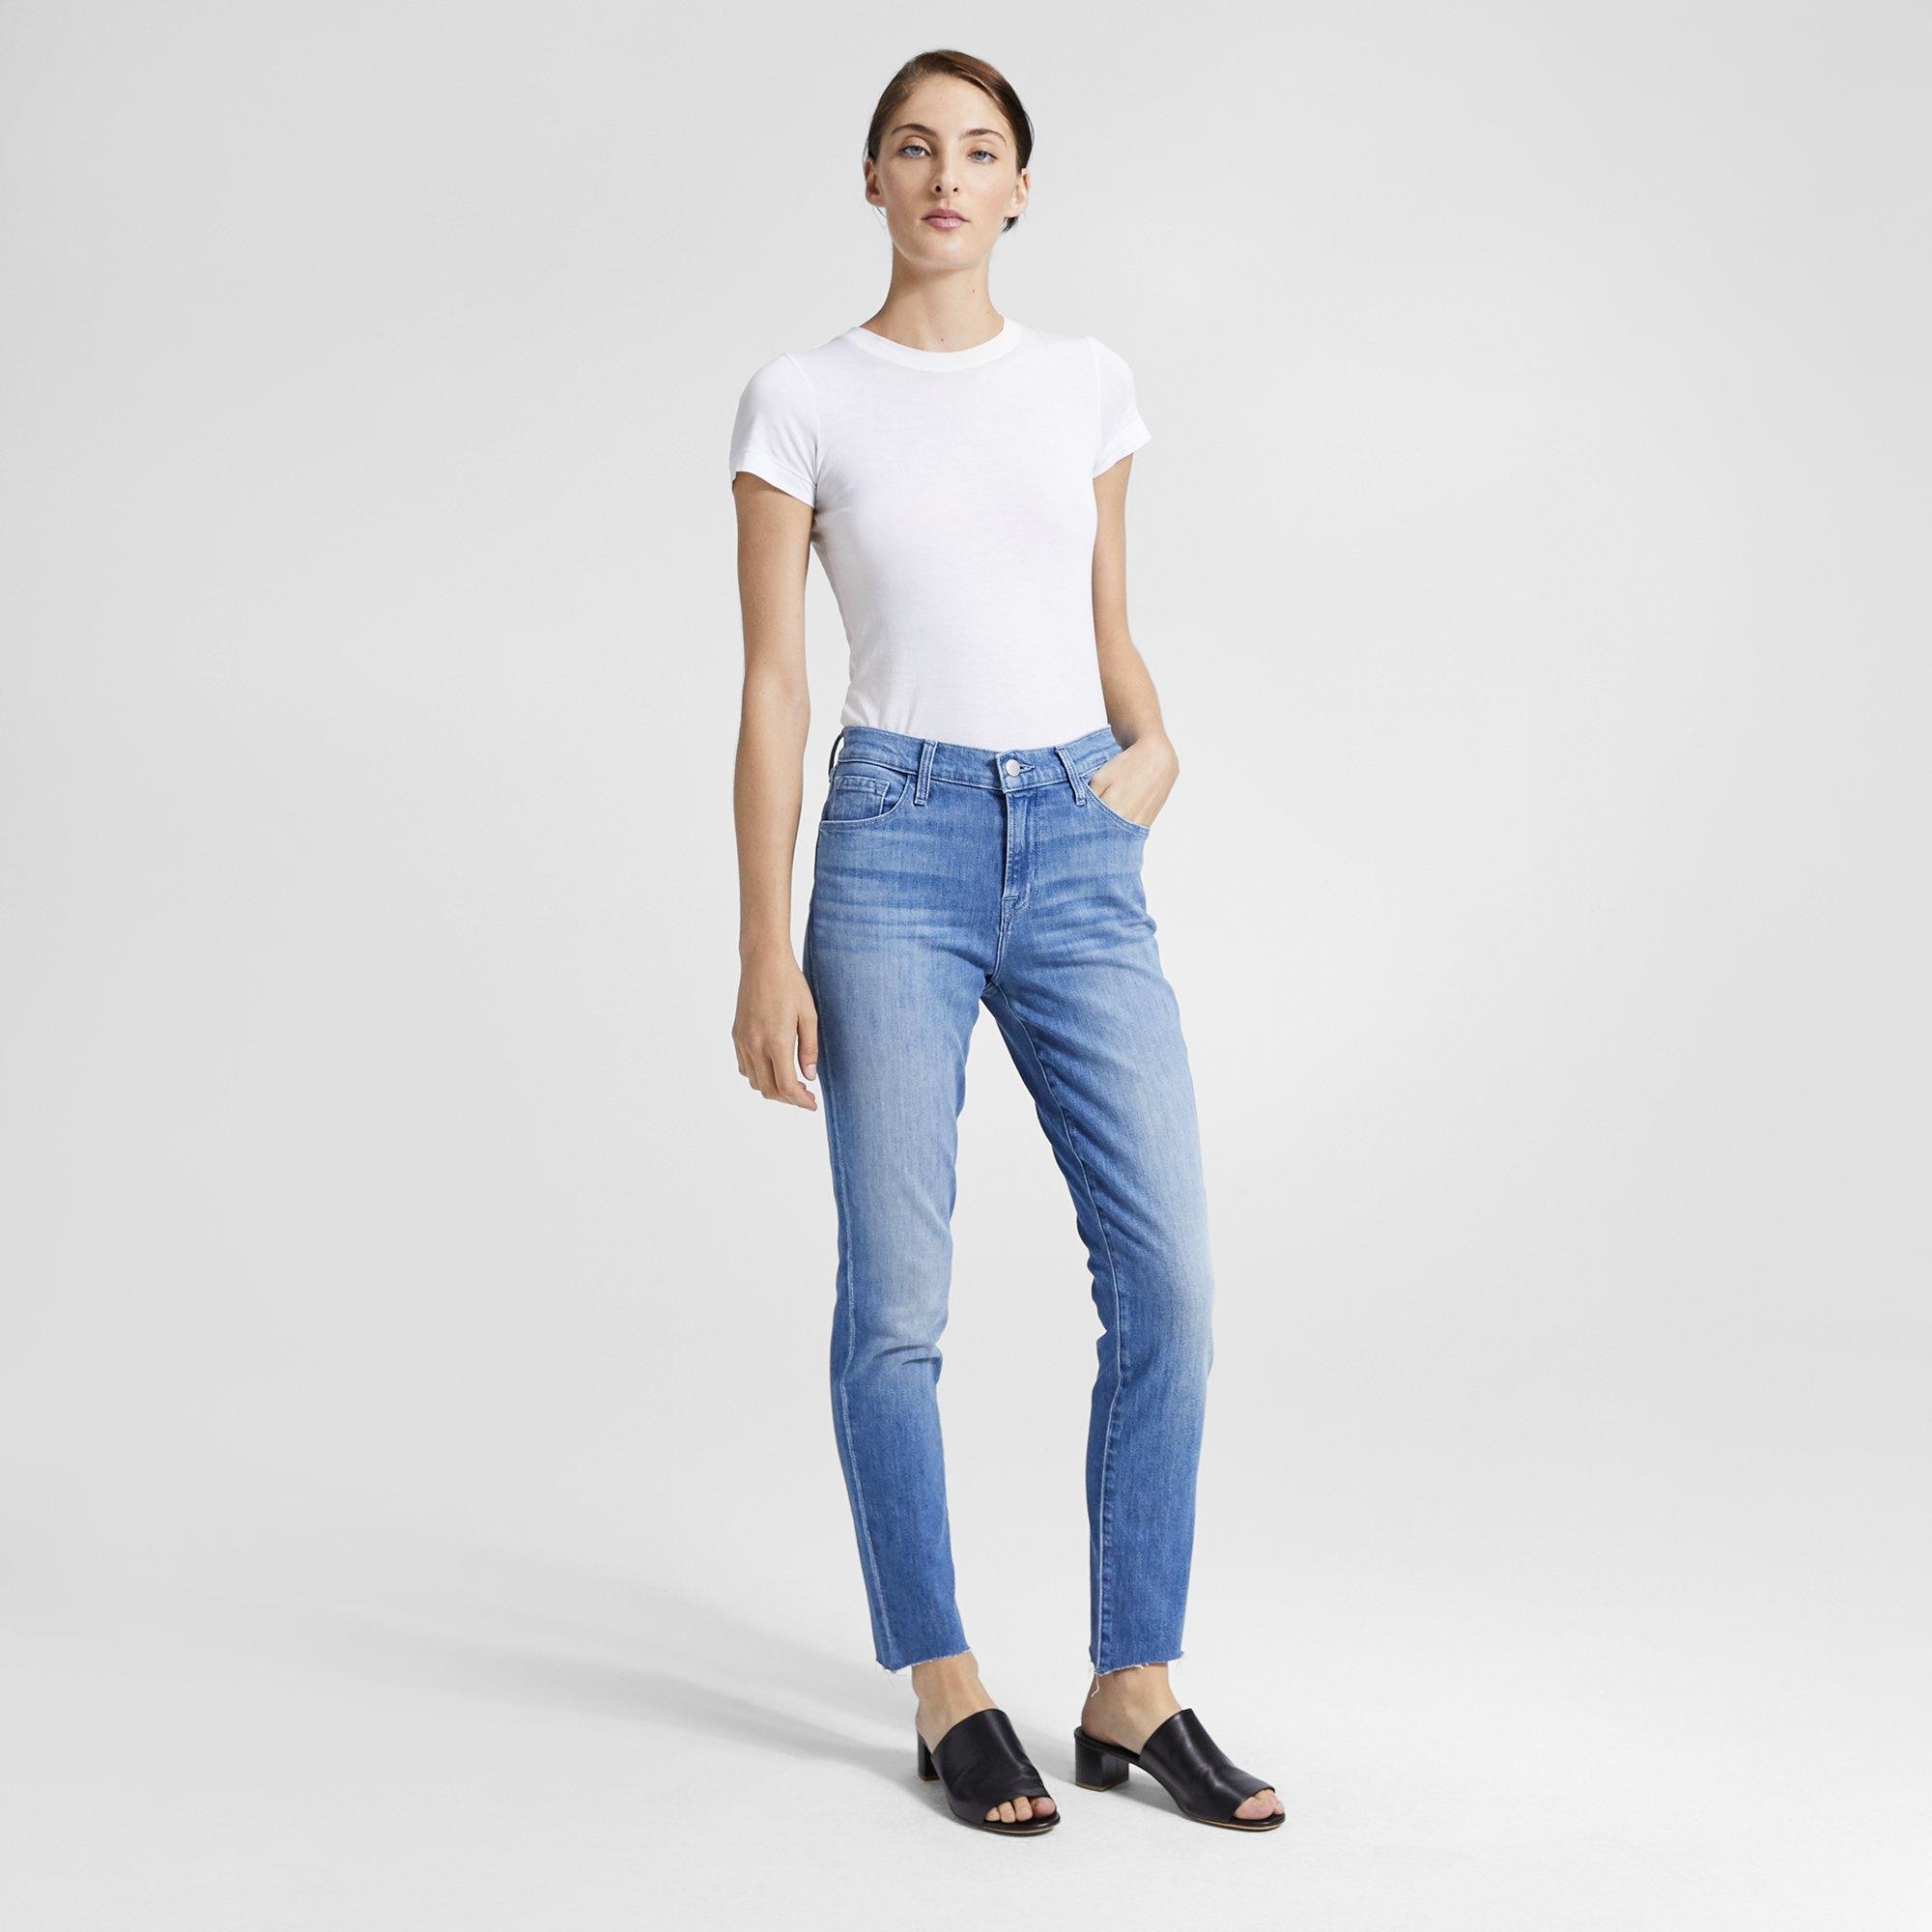 Theory Official | J Brand Ruby High-Rise Crop